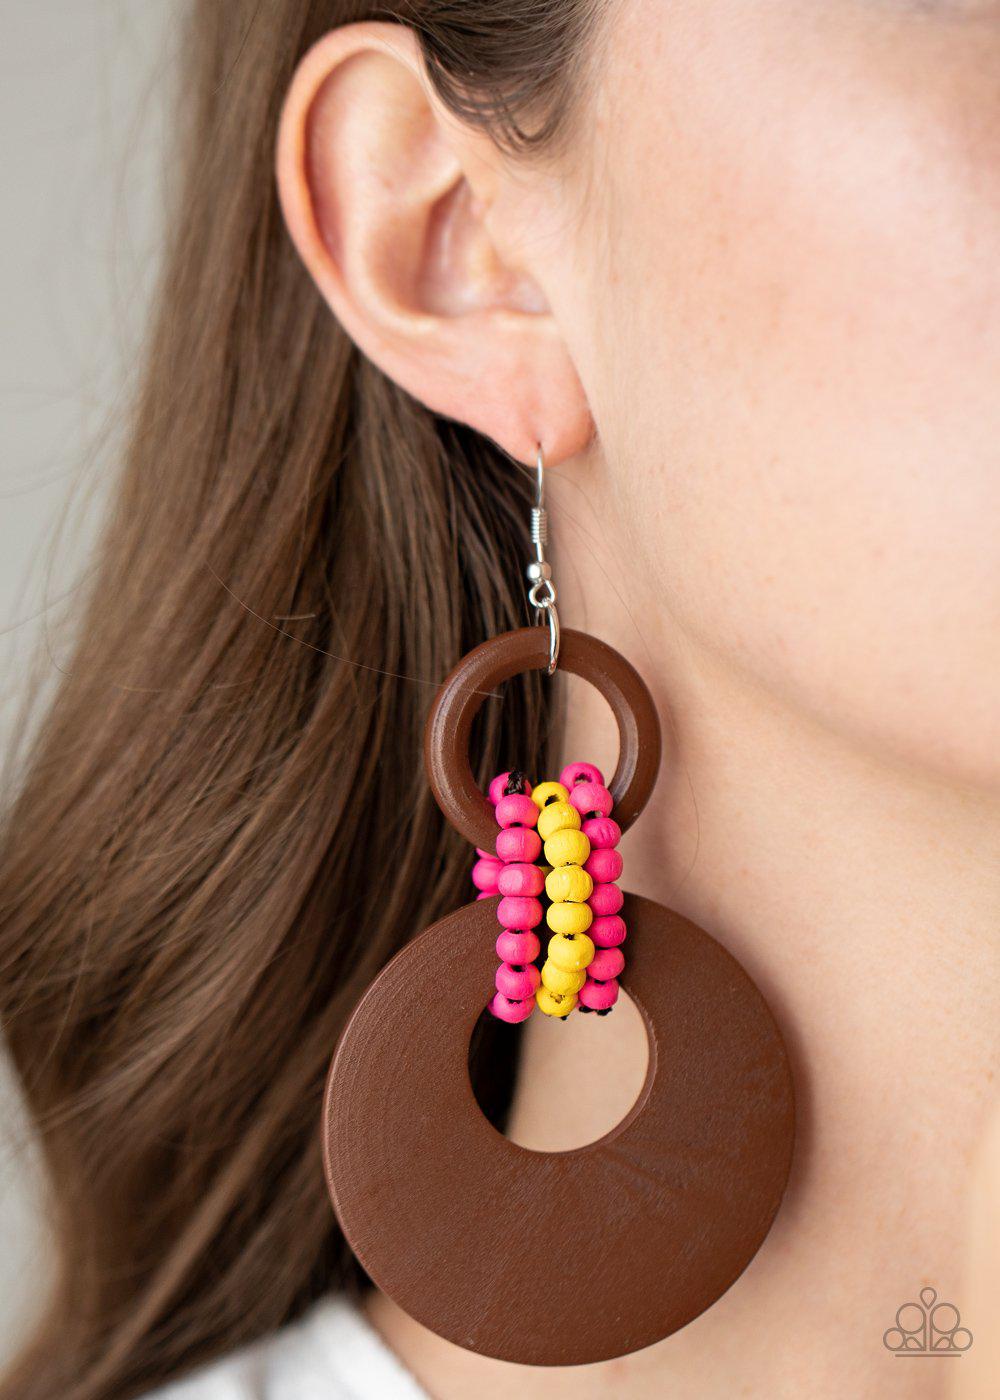 Beach Day Drama Multi - Pink, Yellow and Brown Wood Earrings - Paparazzi Accessories - model -CarasShop.com - $5 Jewelry by Cara Jewels